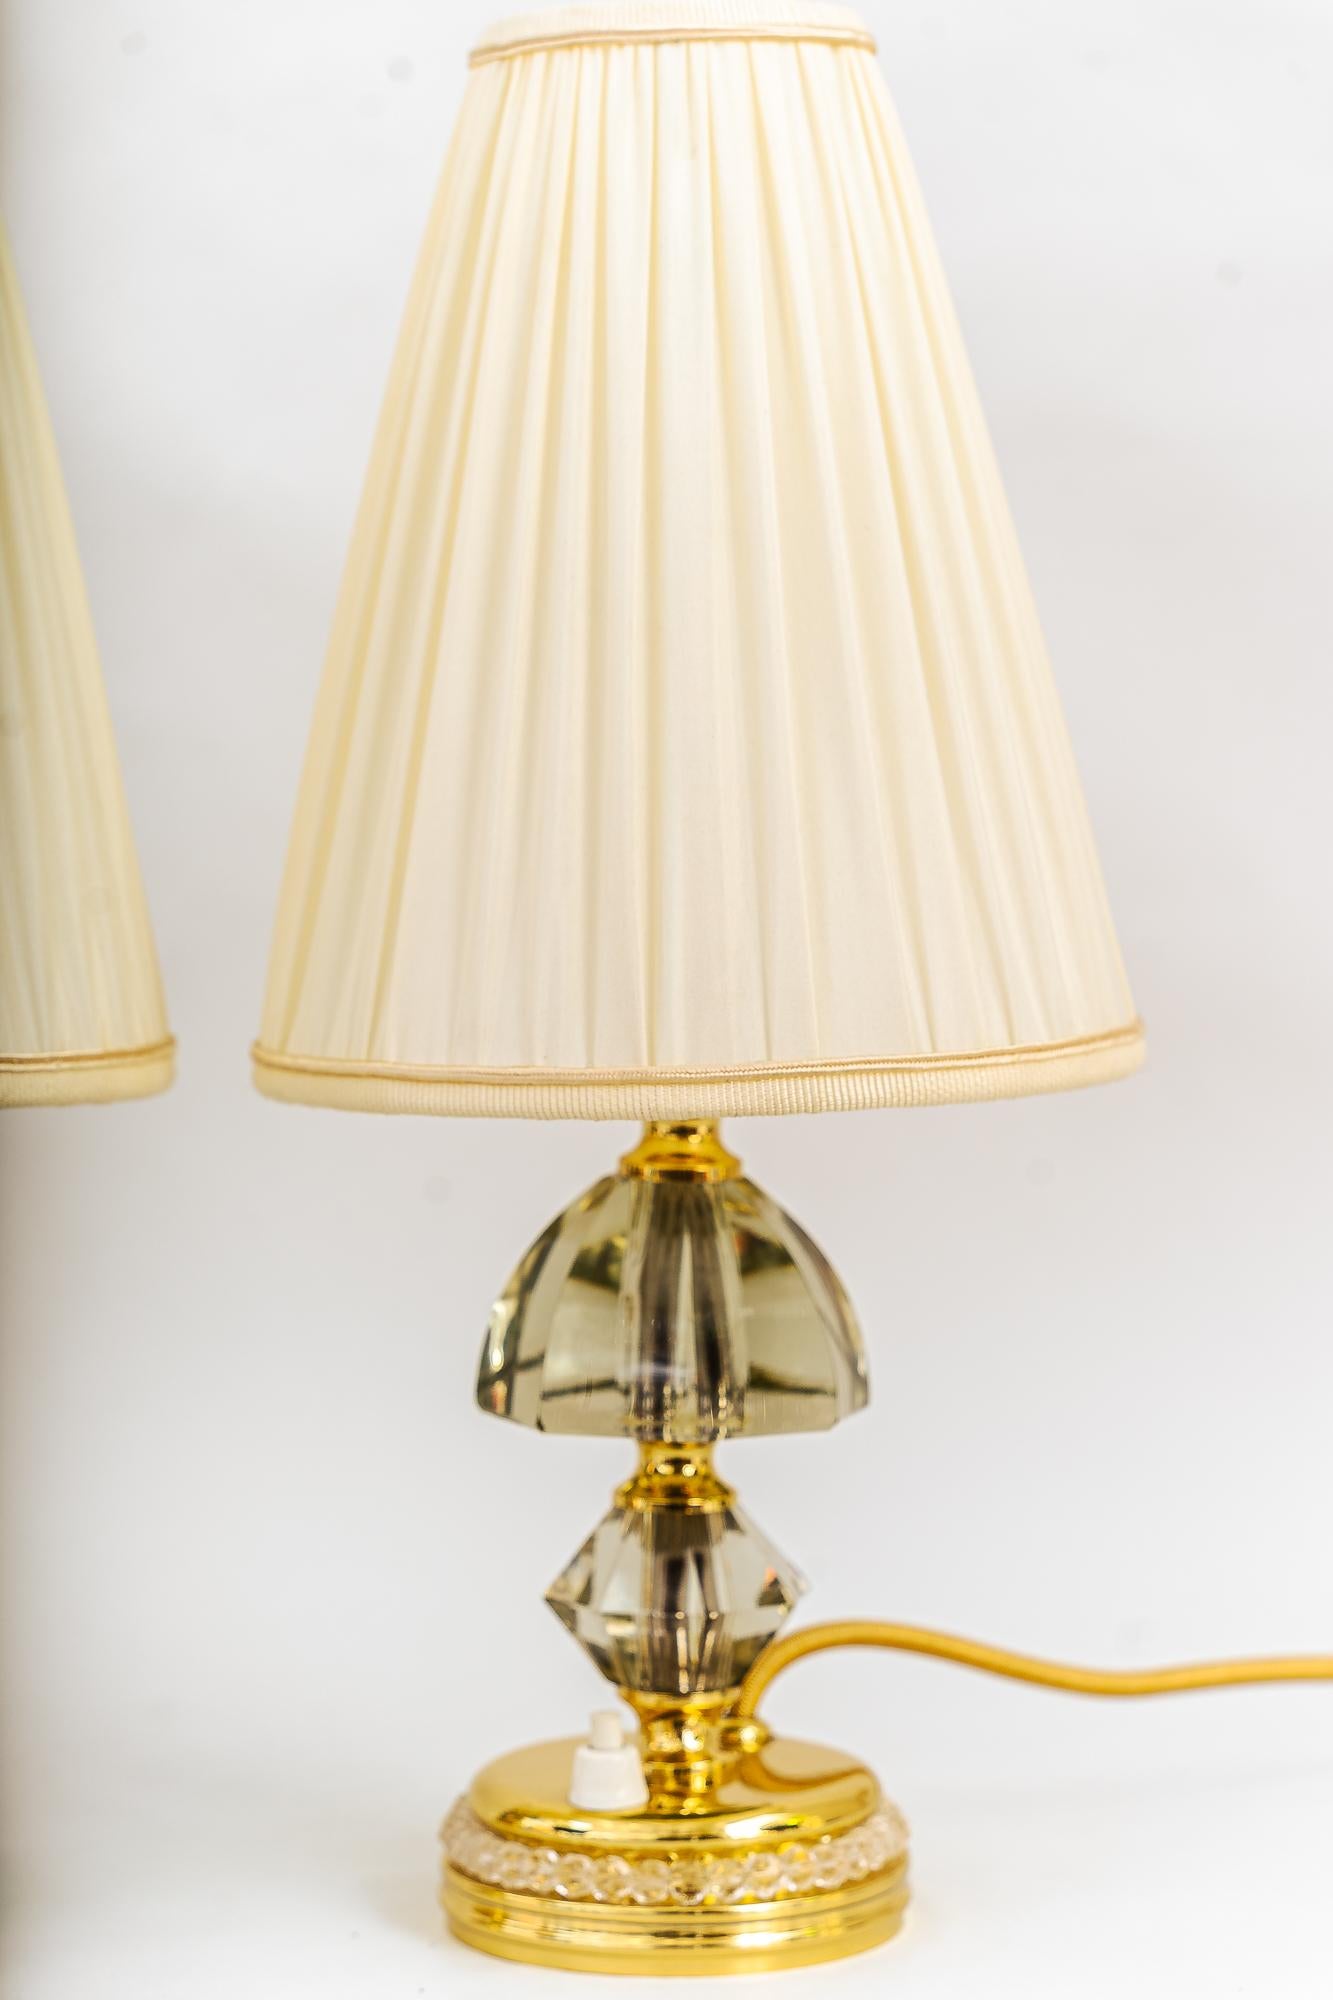 2 Bakalowits table lamps with shades vienna around 1950s
Fabric shades are replaced ( new )
Brass polished 
Pair price.